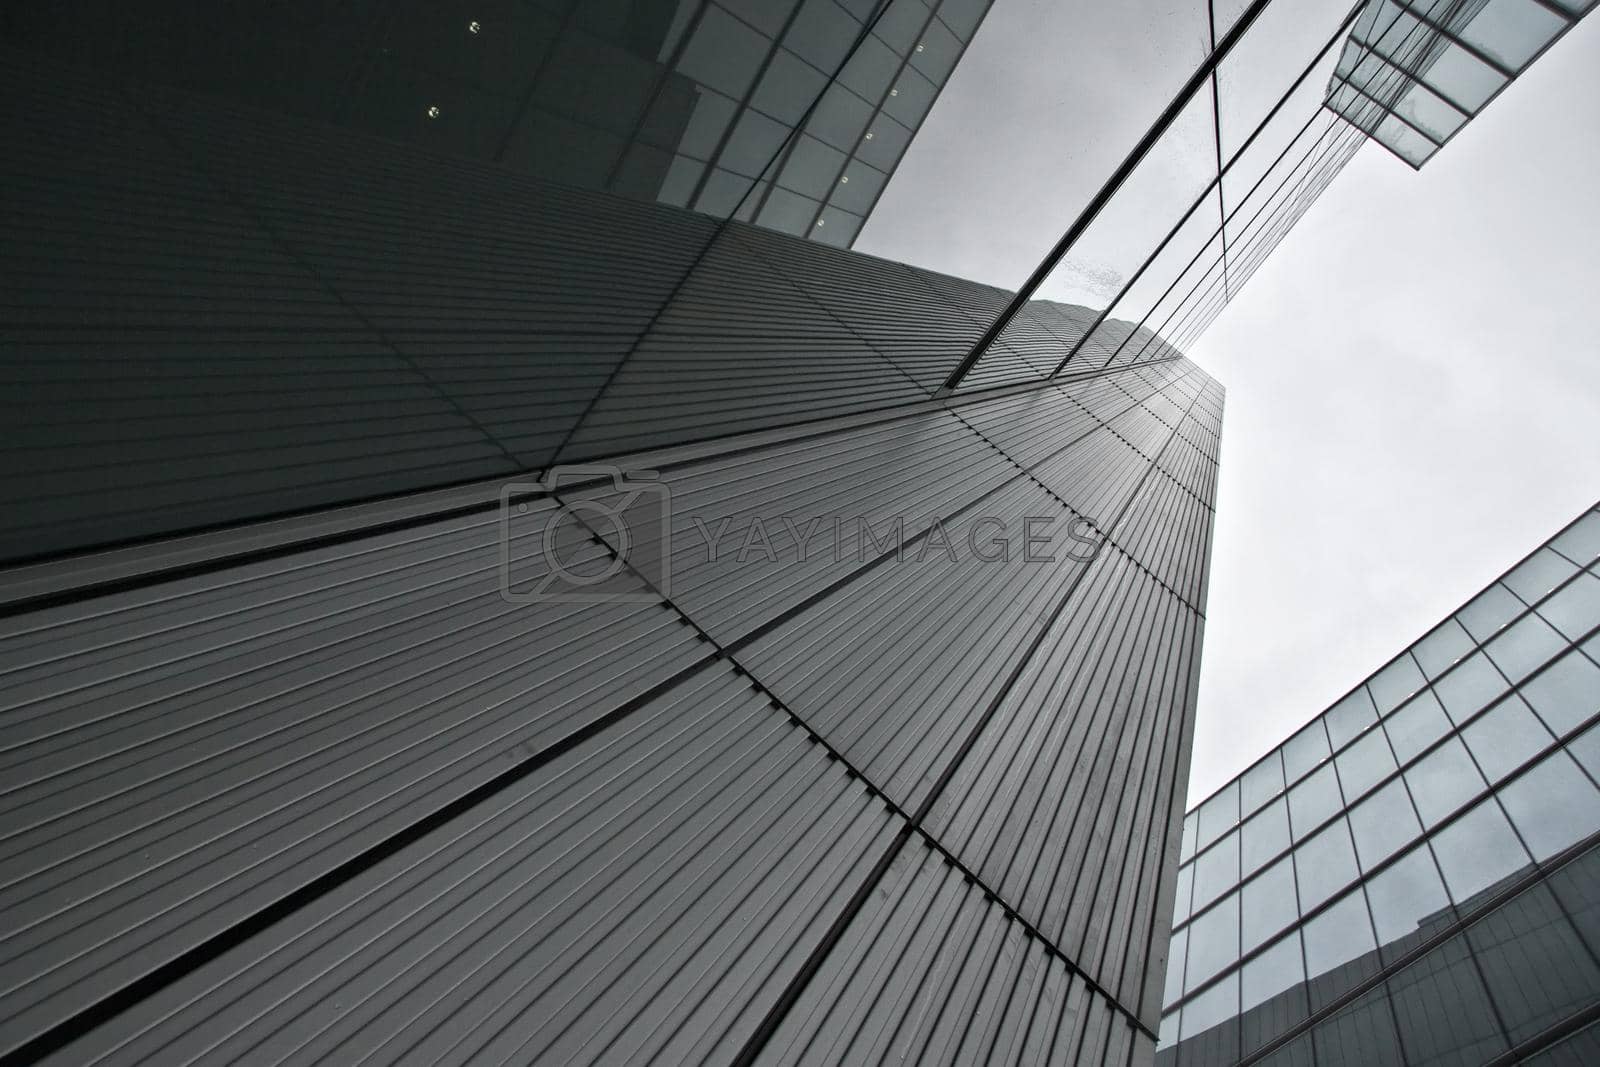 London, United Kingdom - October 22, 2006: Glass and steel offices ("More London Estates" design by Foster and Partners) overcast sky in background. Example of modern architecture in UK capital